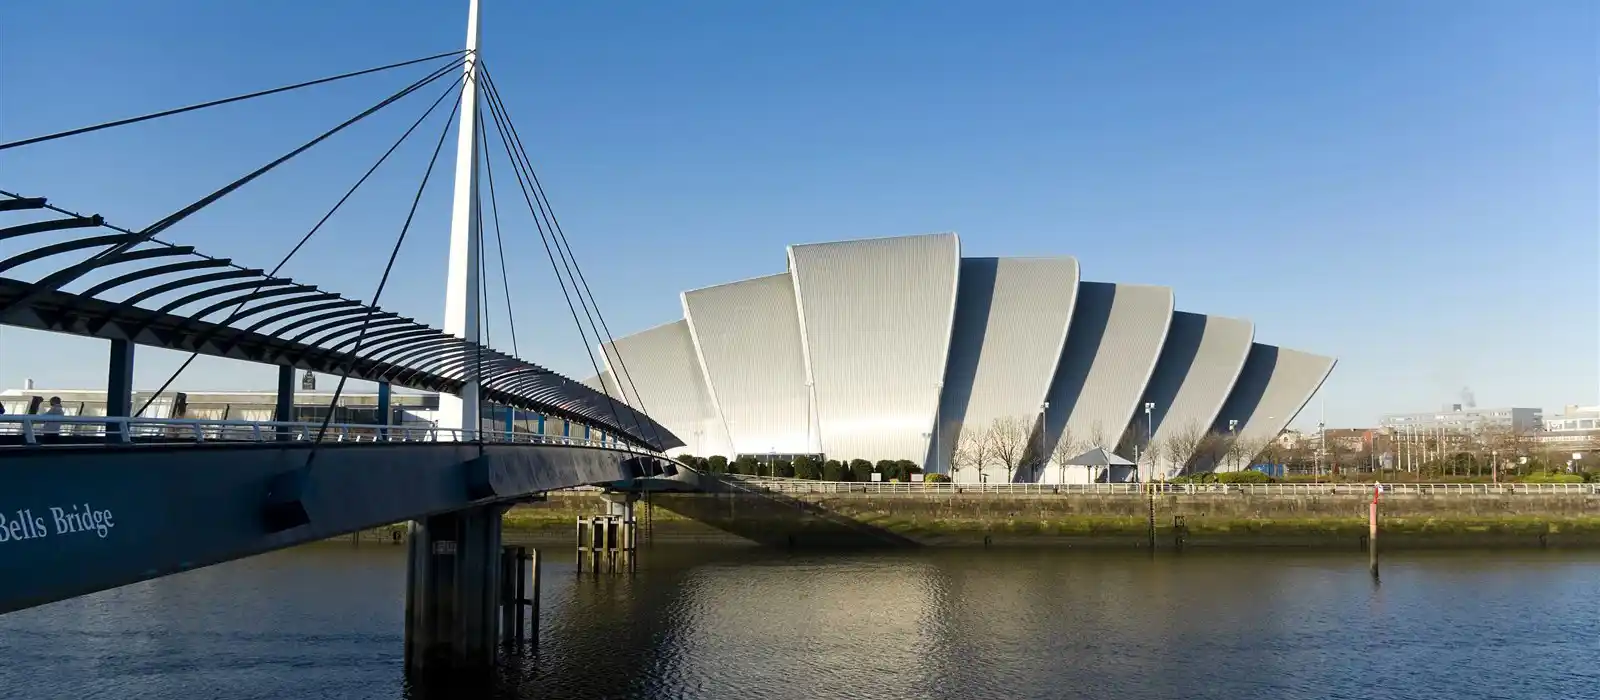 Clyde Auditorium, Glasgow and the Clyde Valley